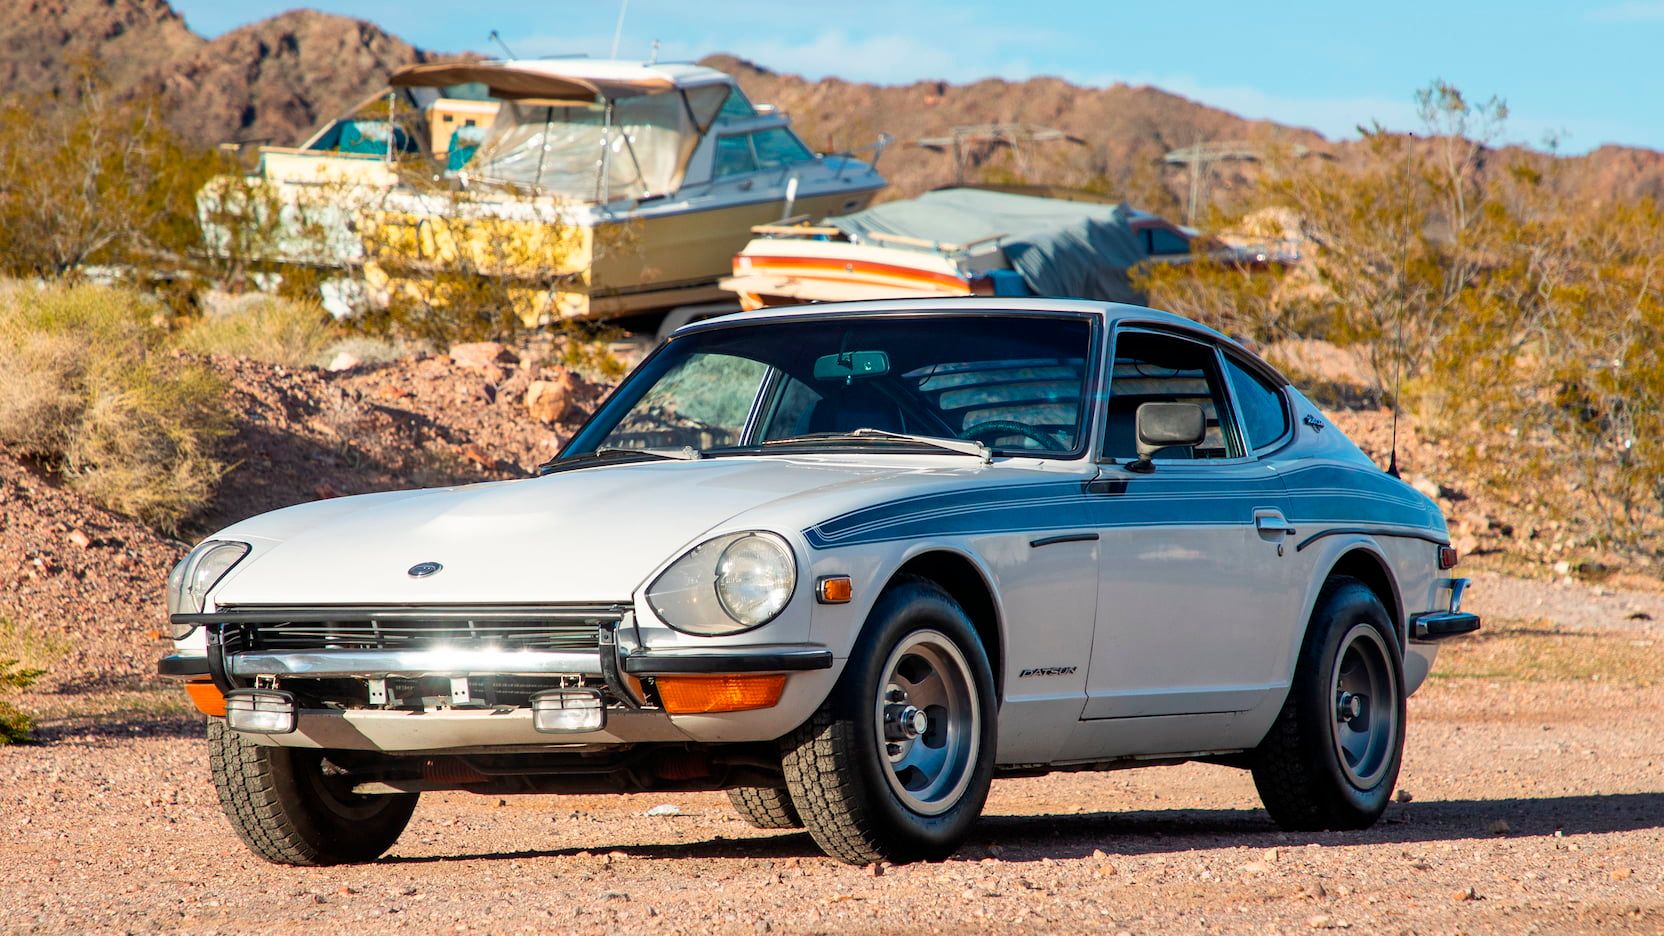 1971 Datsun 240Z, grey with decals